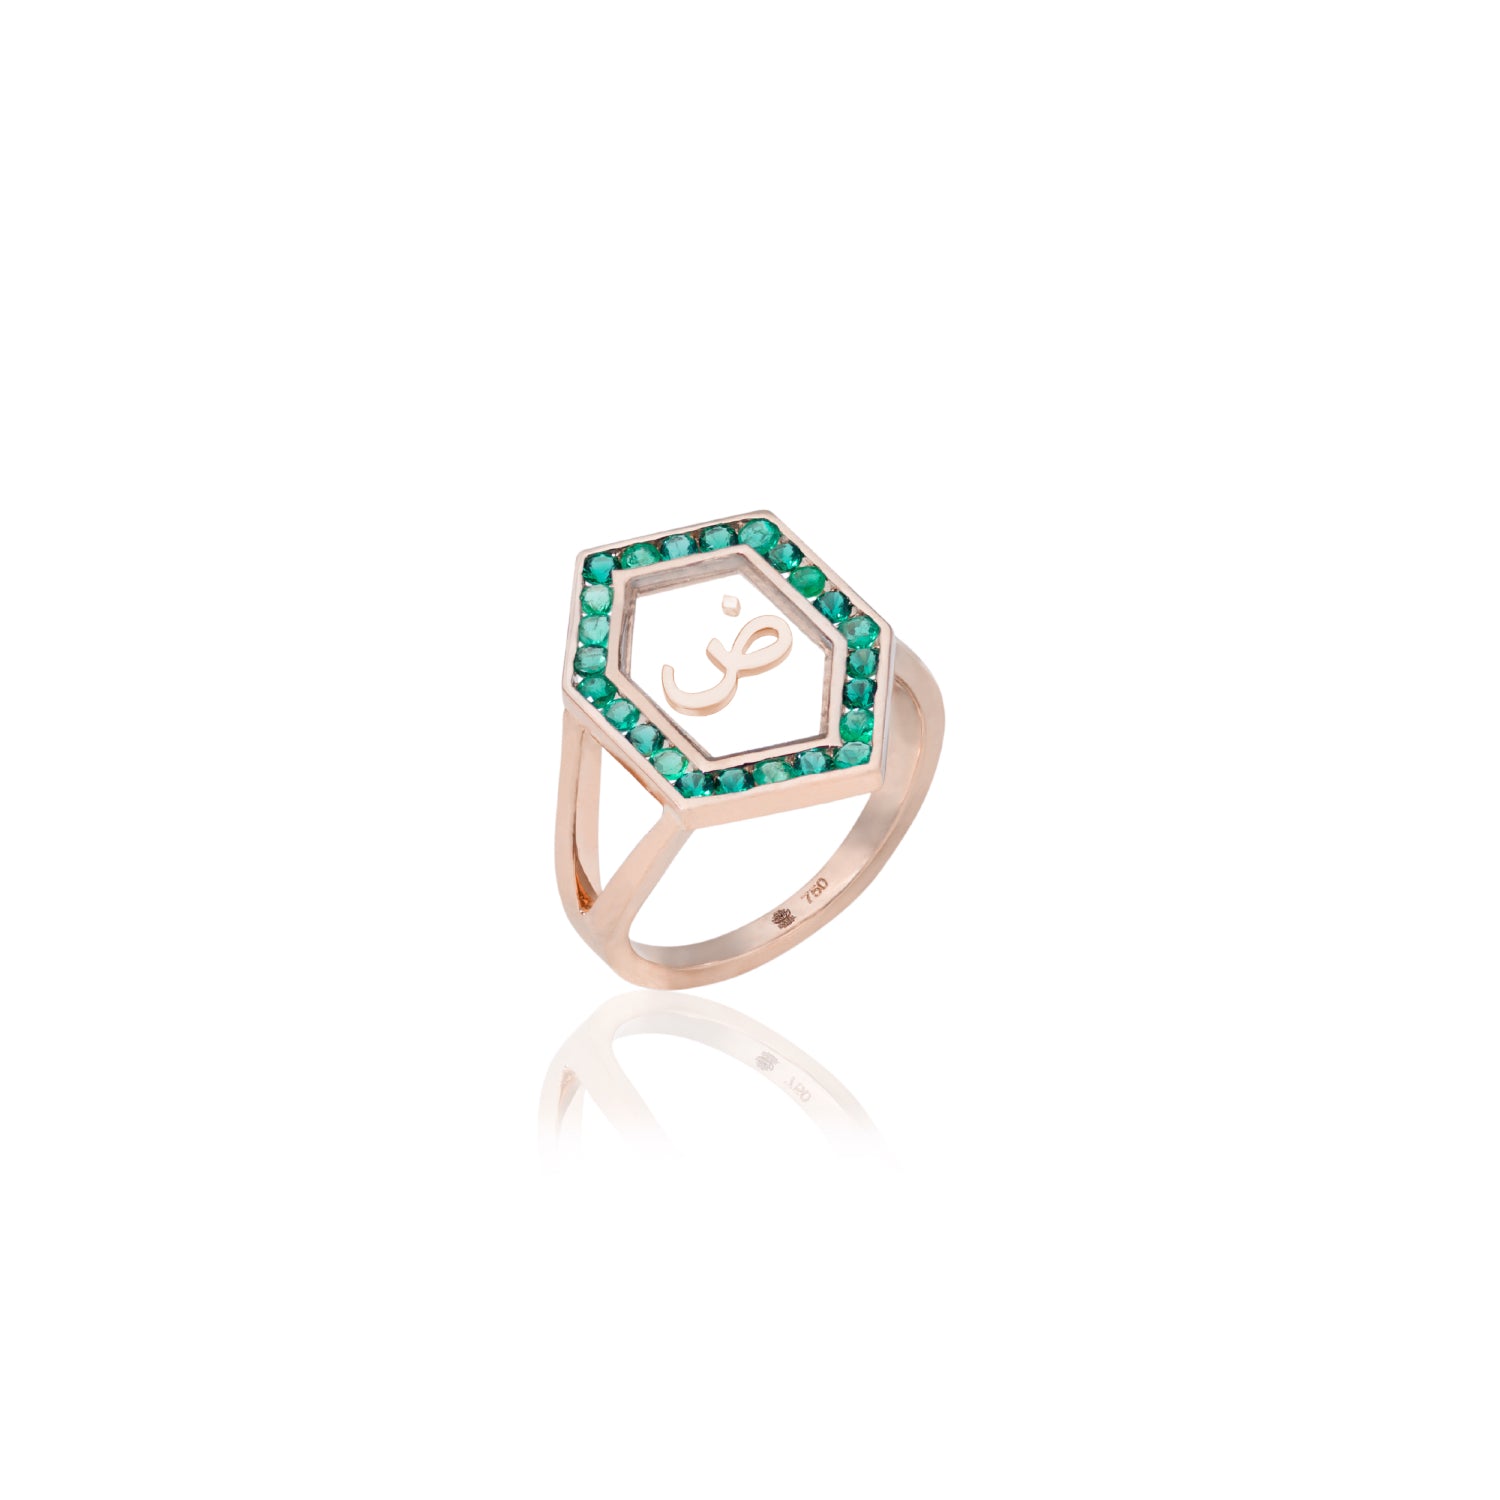 Qamoos 1.0 Letter ض Emerald Ring in Rose Gold